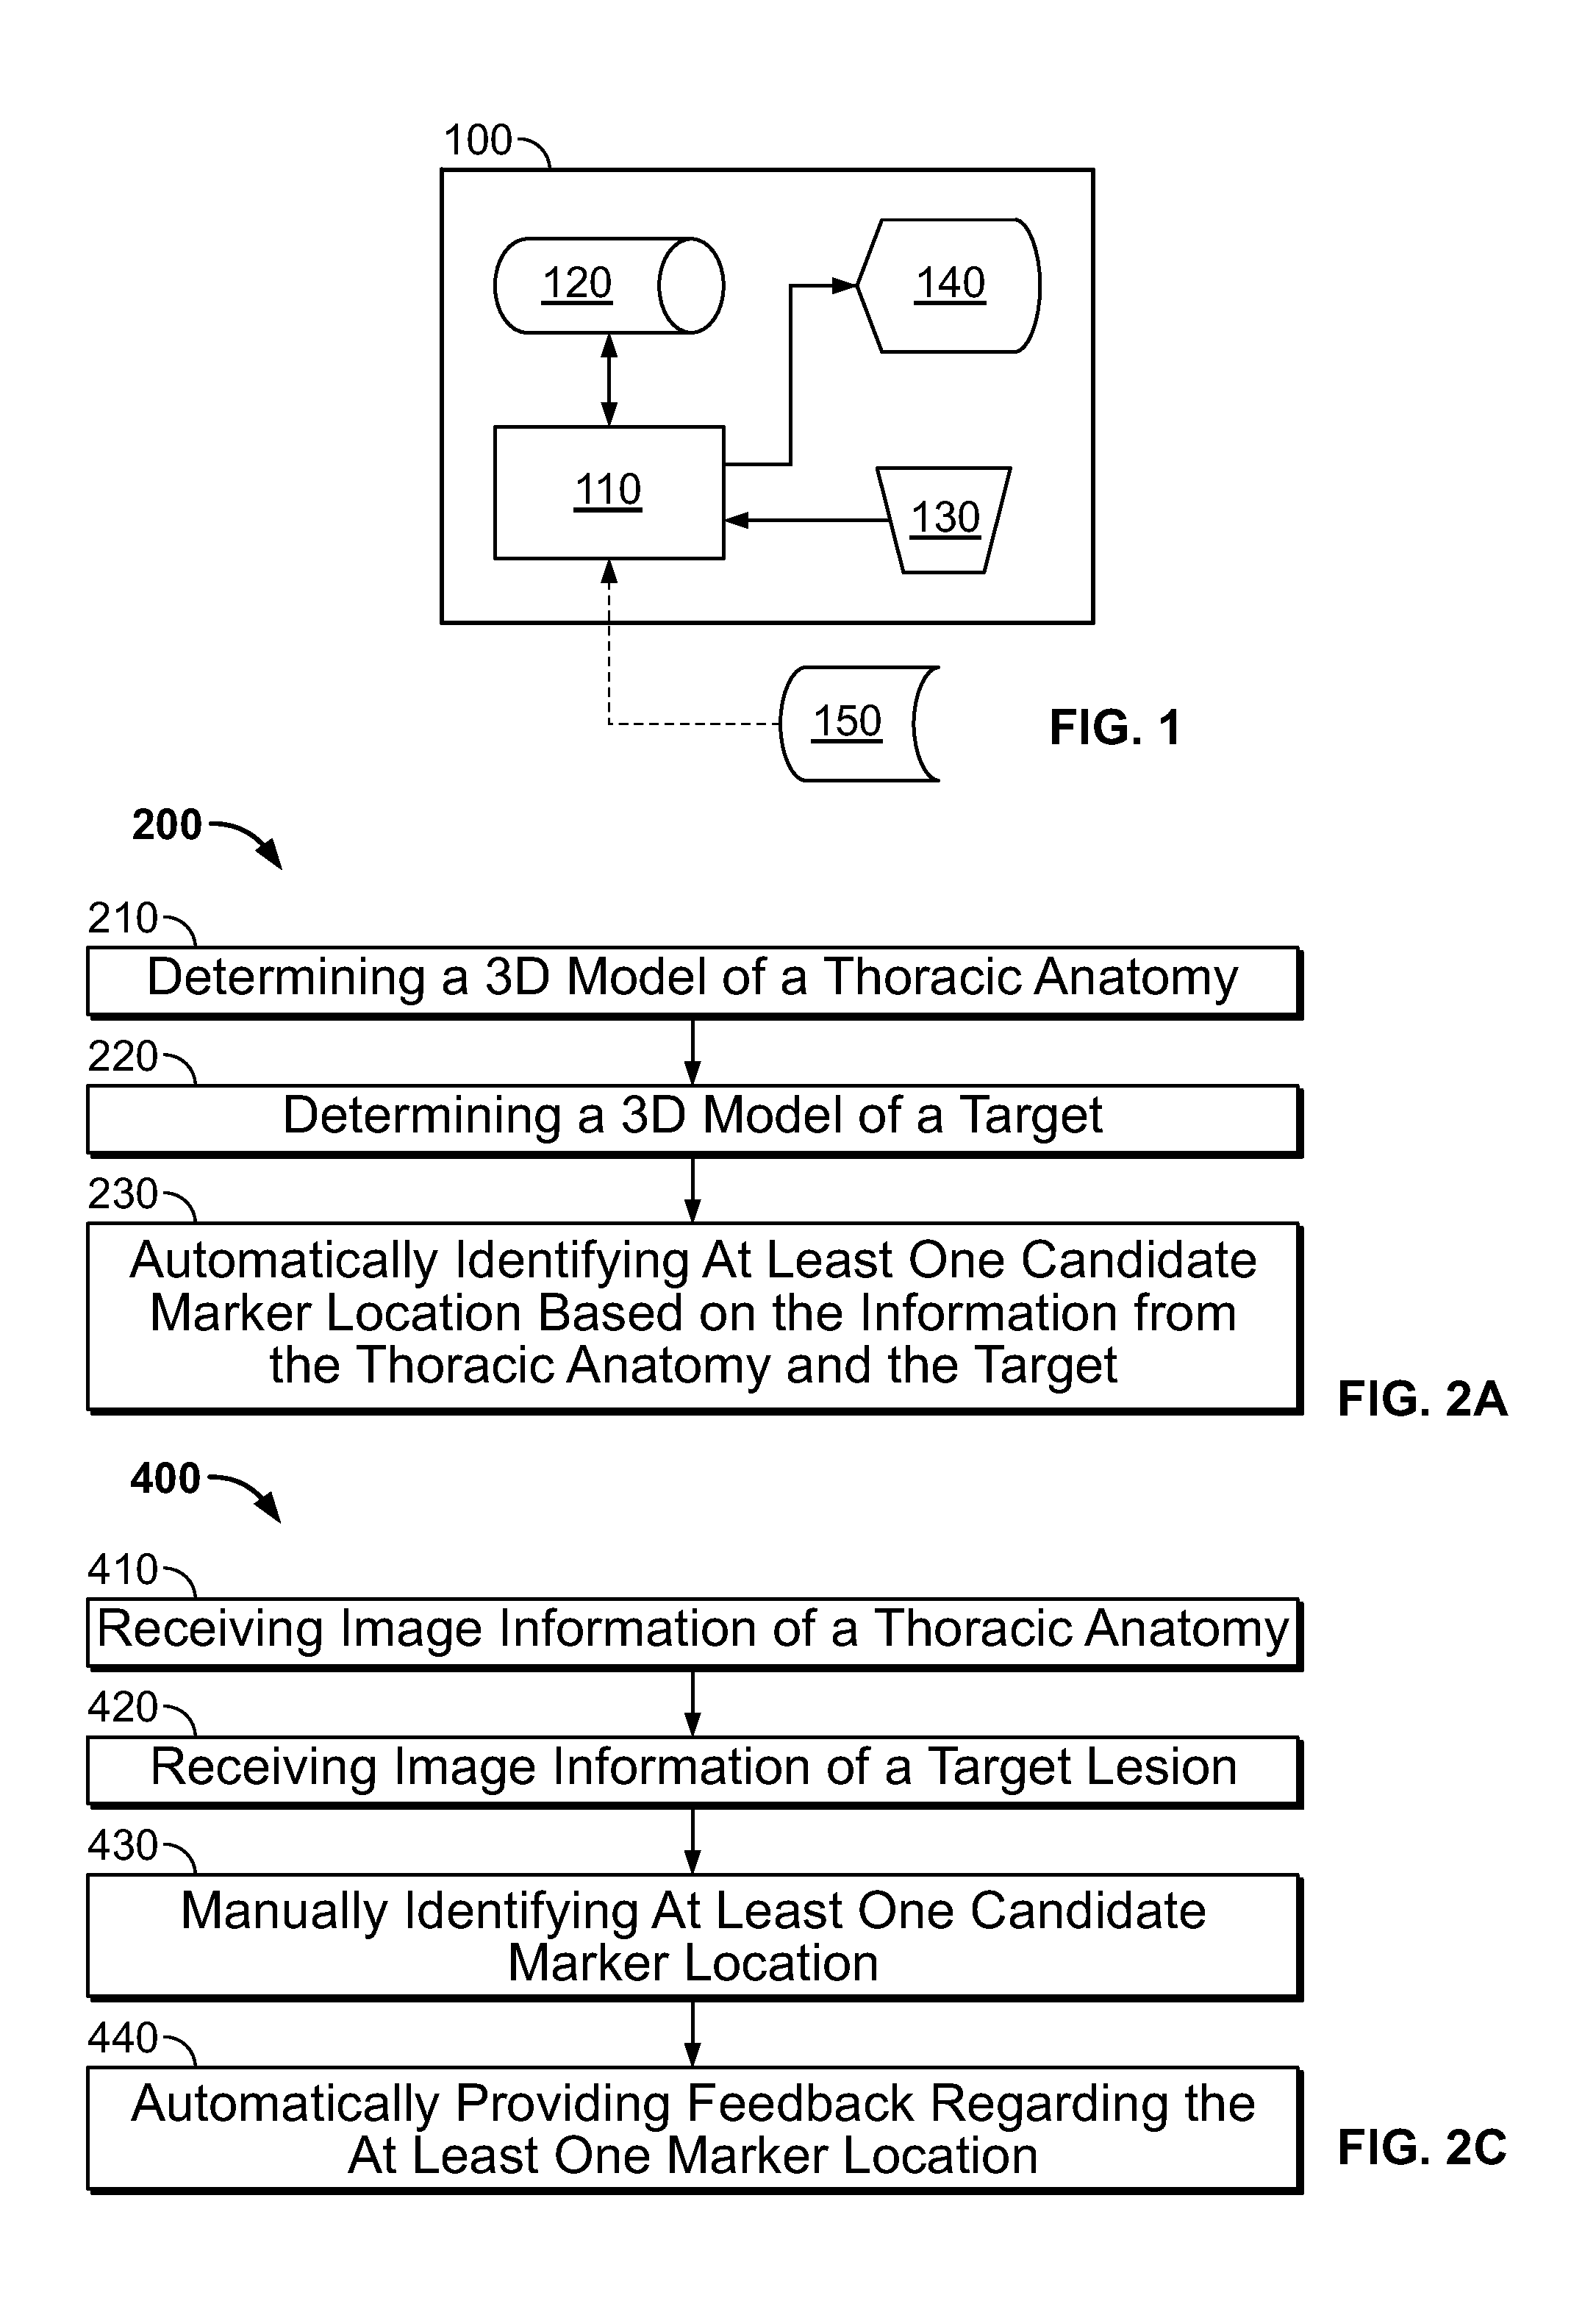 Automated fiducial marker planning system and related methods